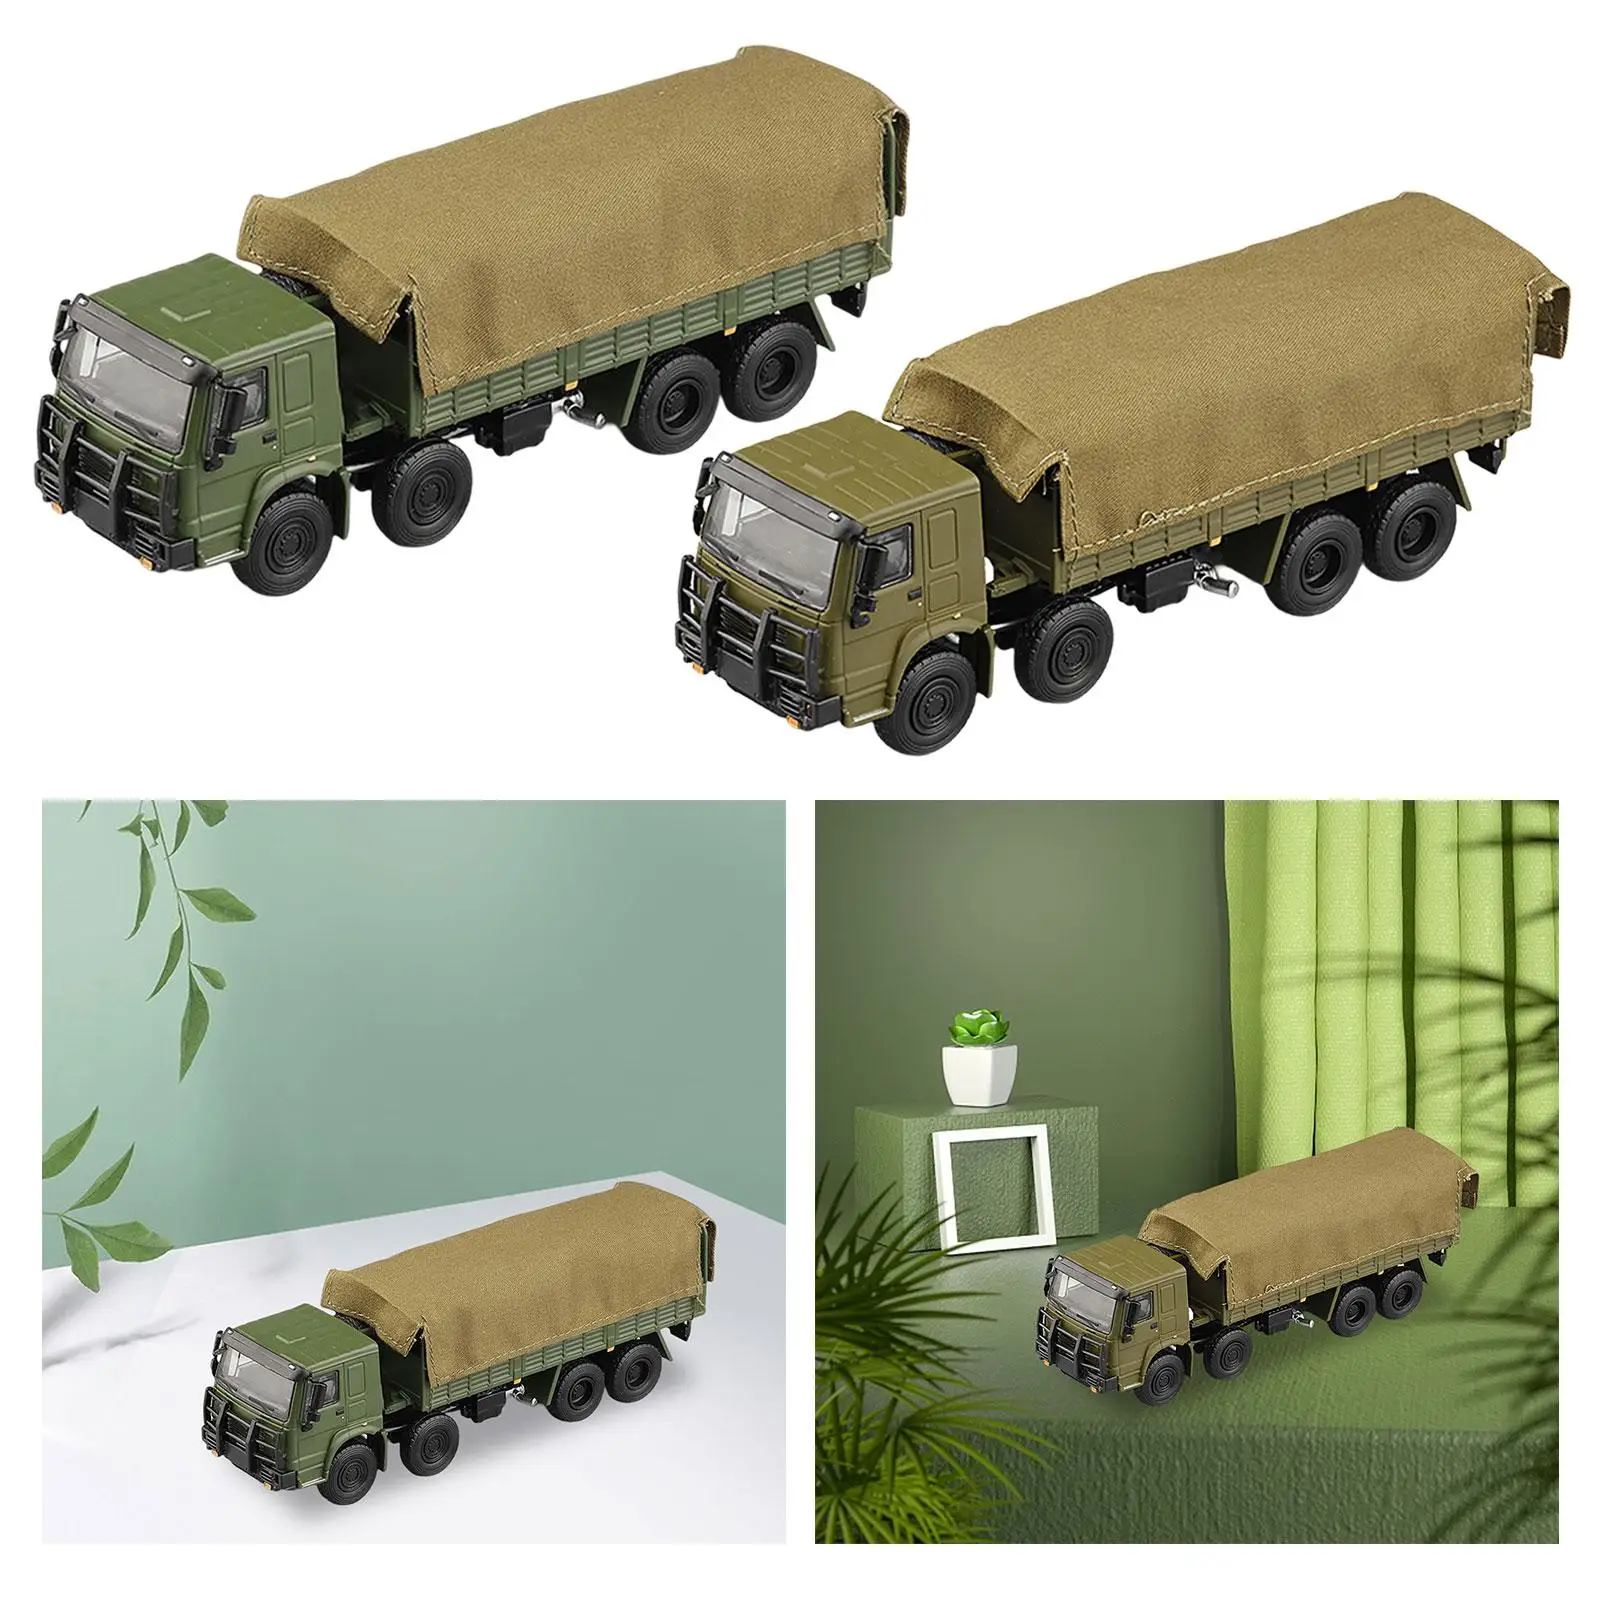 1/64 Diecast Model Car Truck Sand Table Ornament Children Gifts Alloy Car Model for DIY Scene Photography Props Accessories